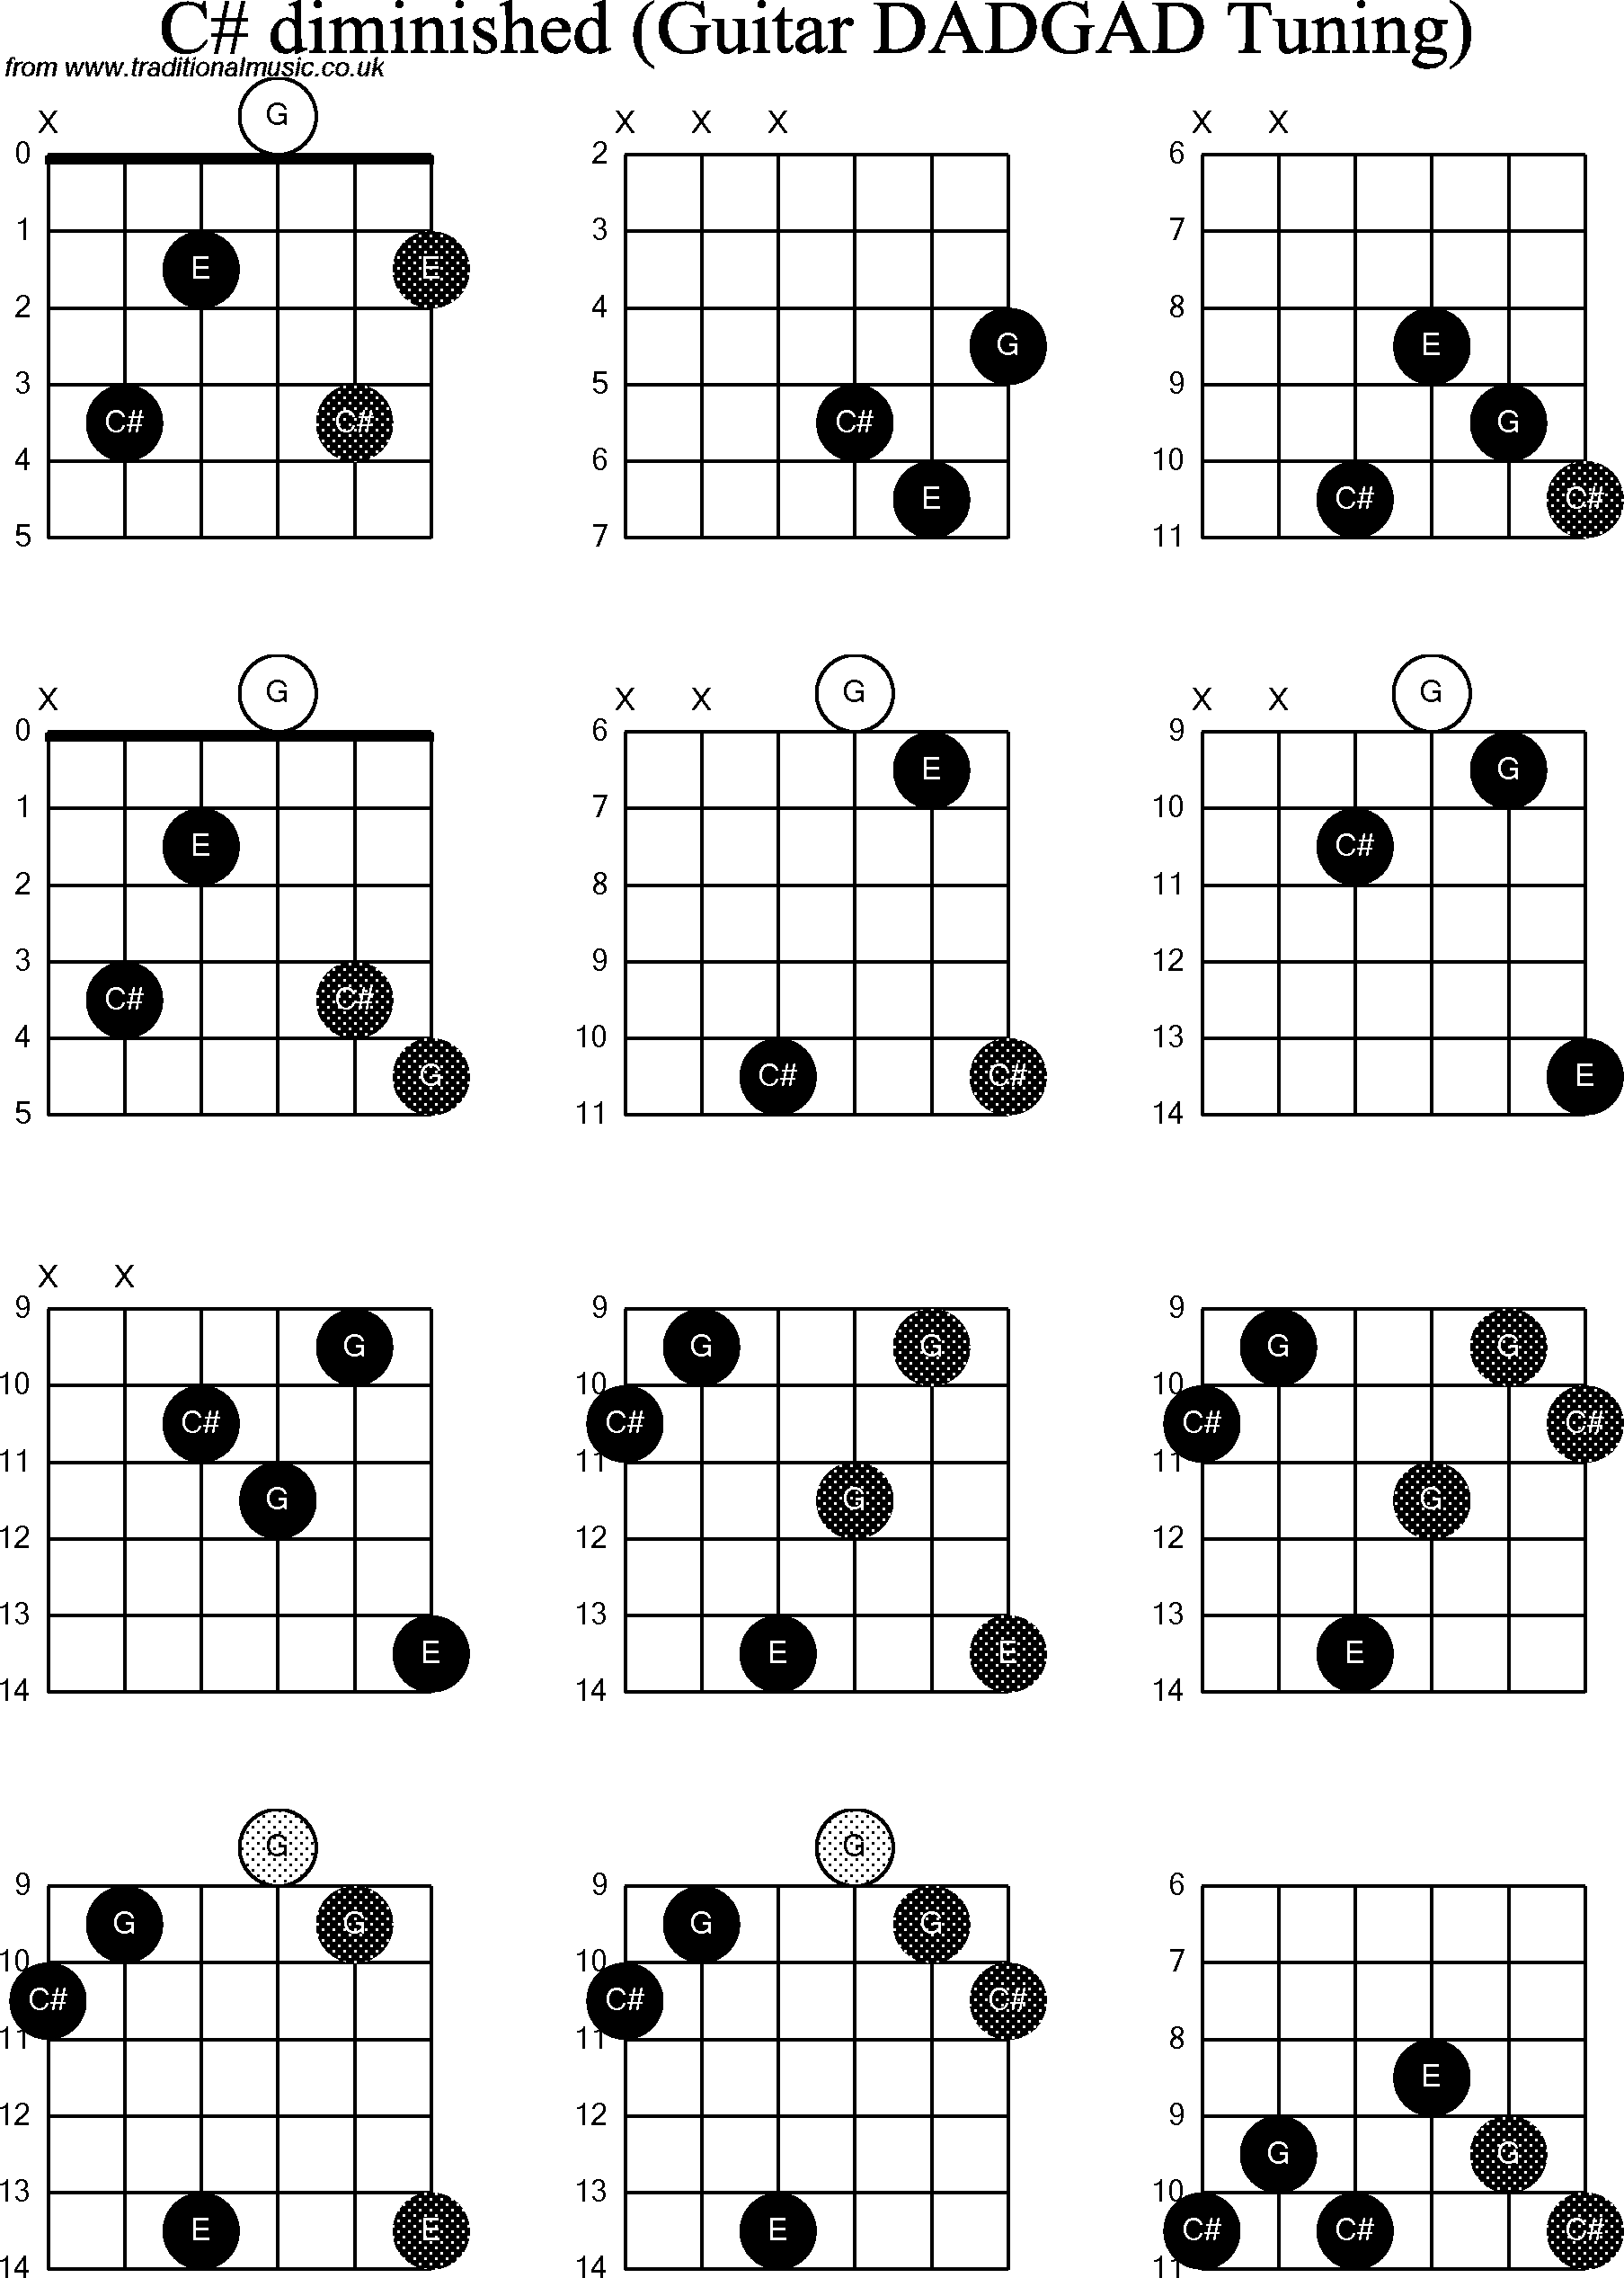 Chord Diagrams for D Modal Guitar(DADGAD), C Sharp Diminished